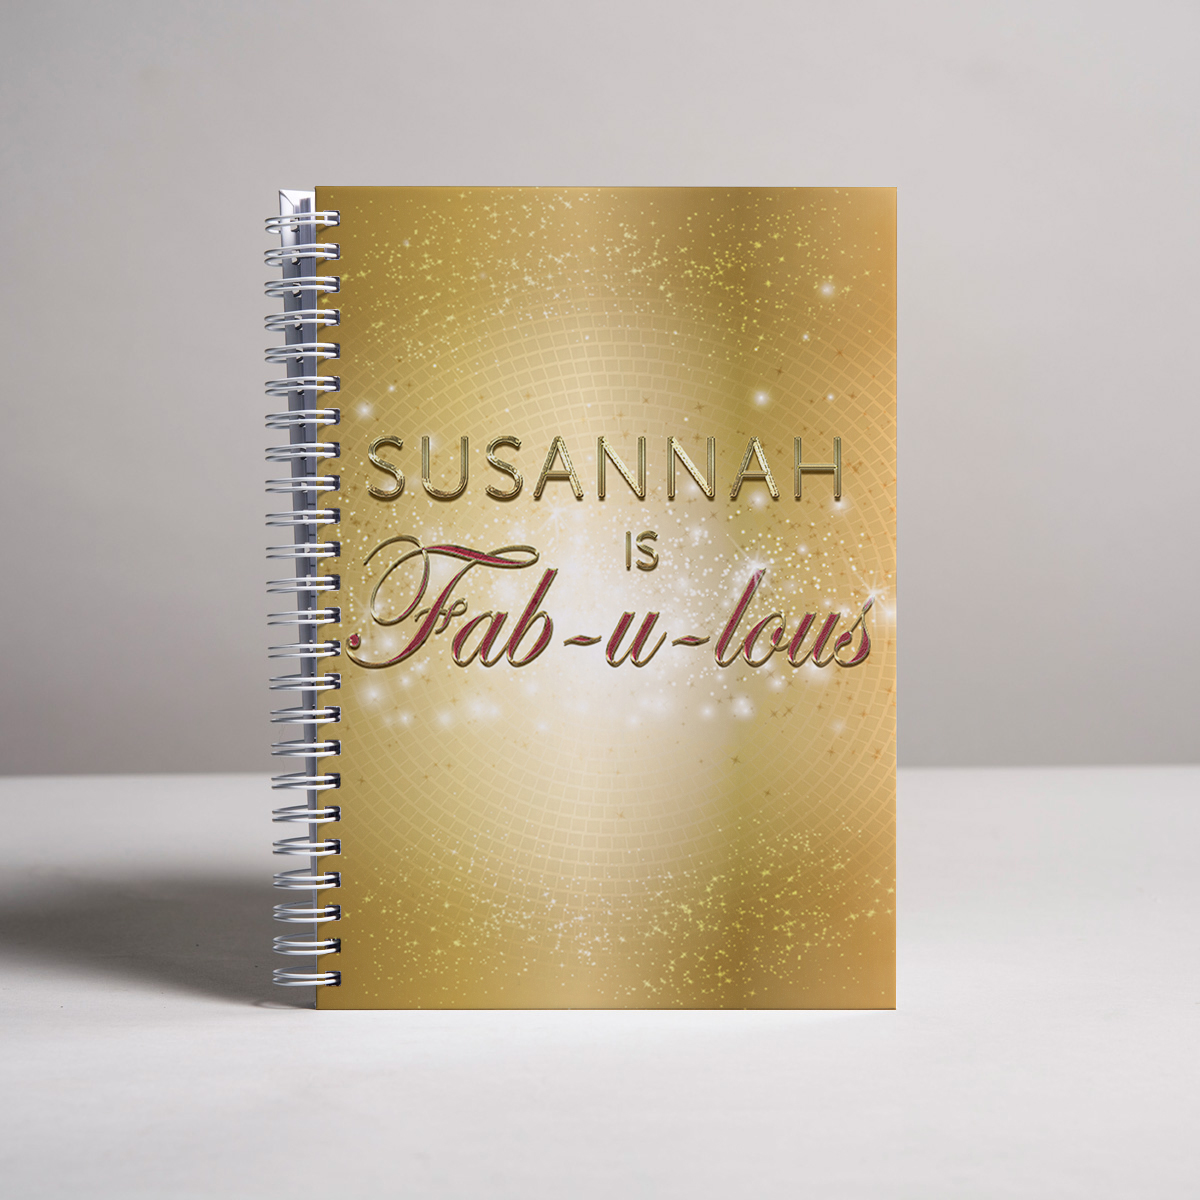 Personalised Notebook - Strictly Fab U Lous